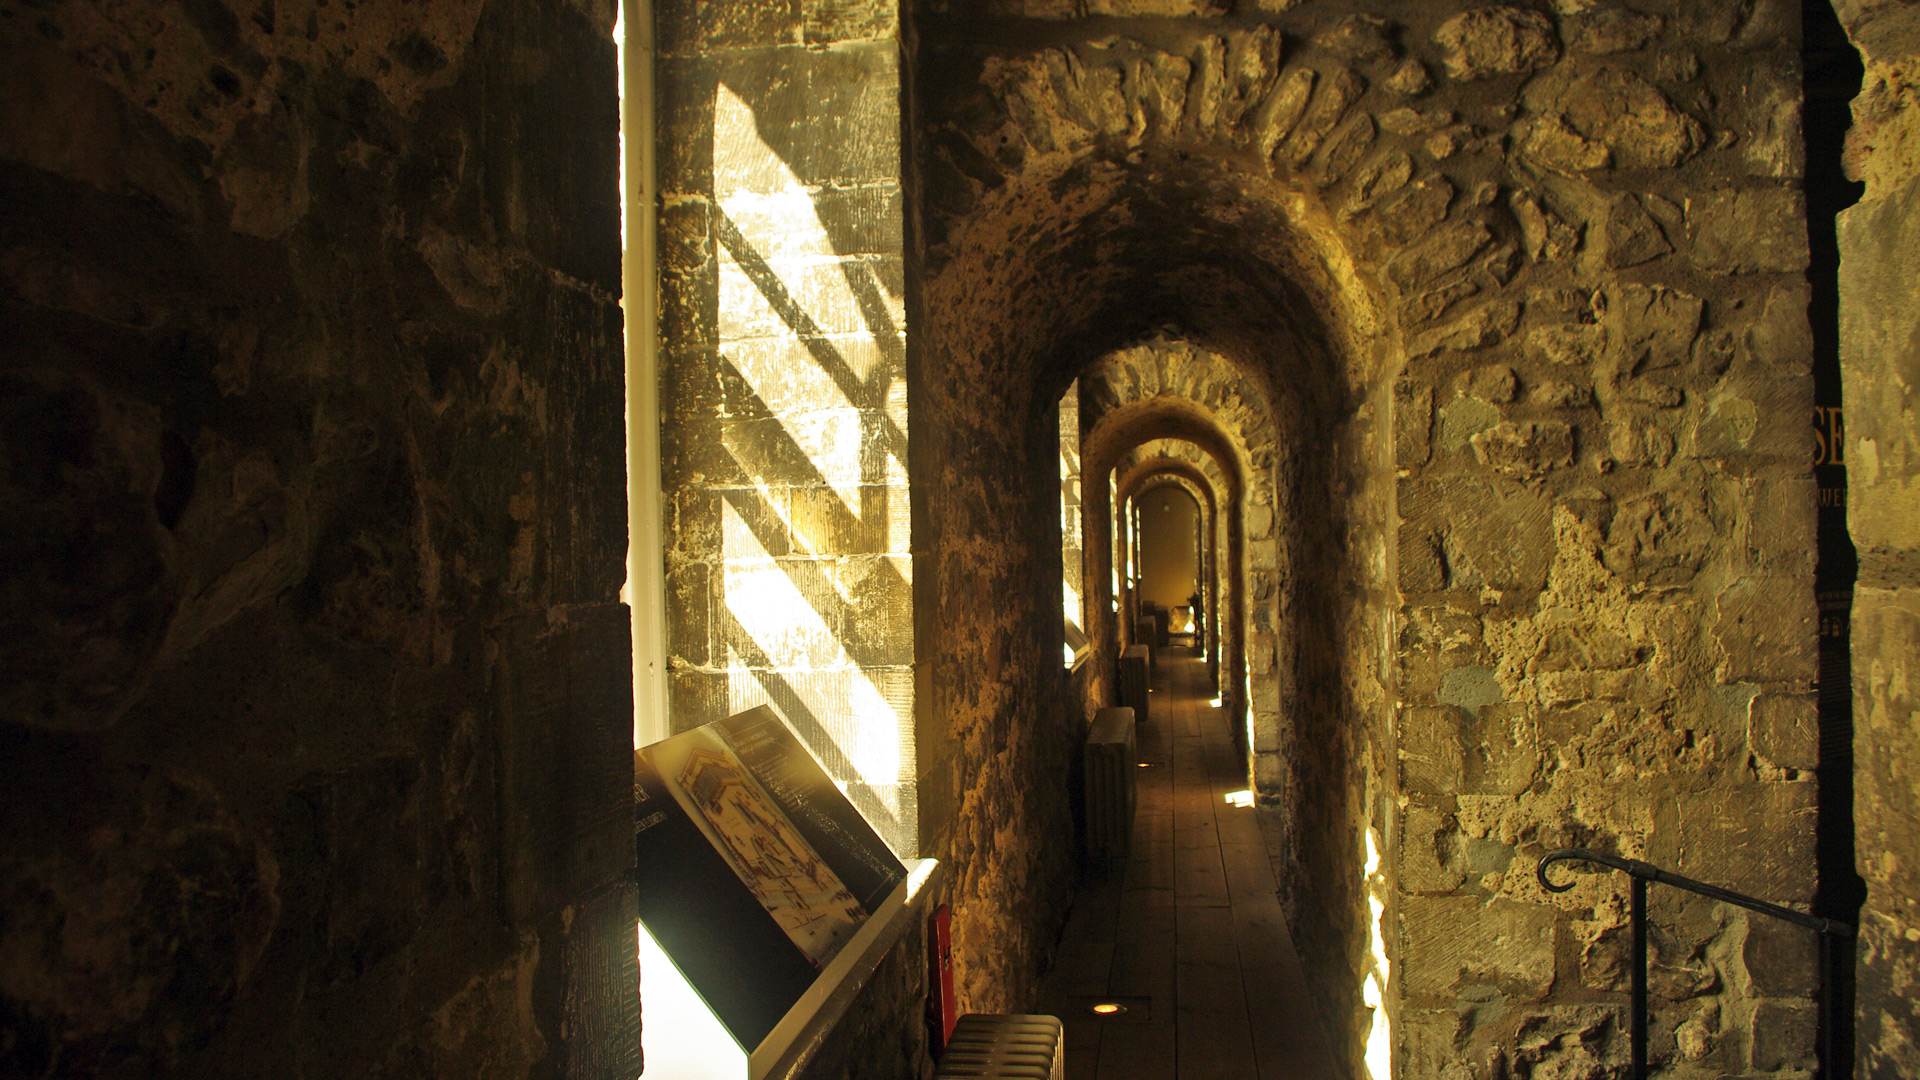 Inside the White Tower - The central fortification